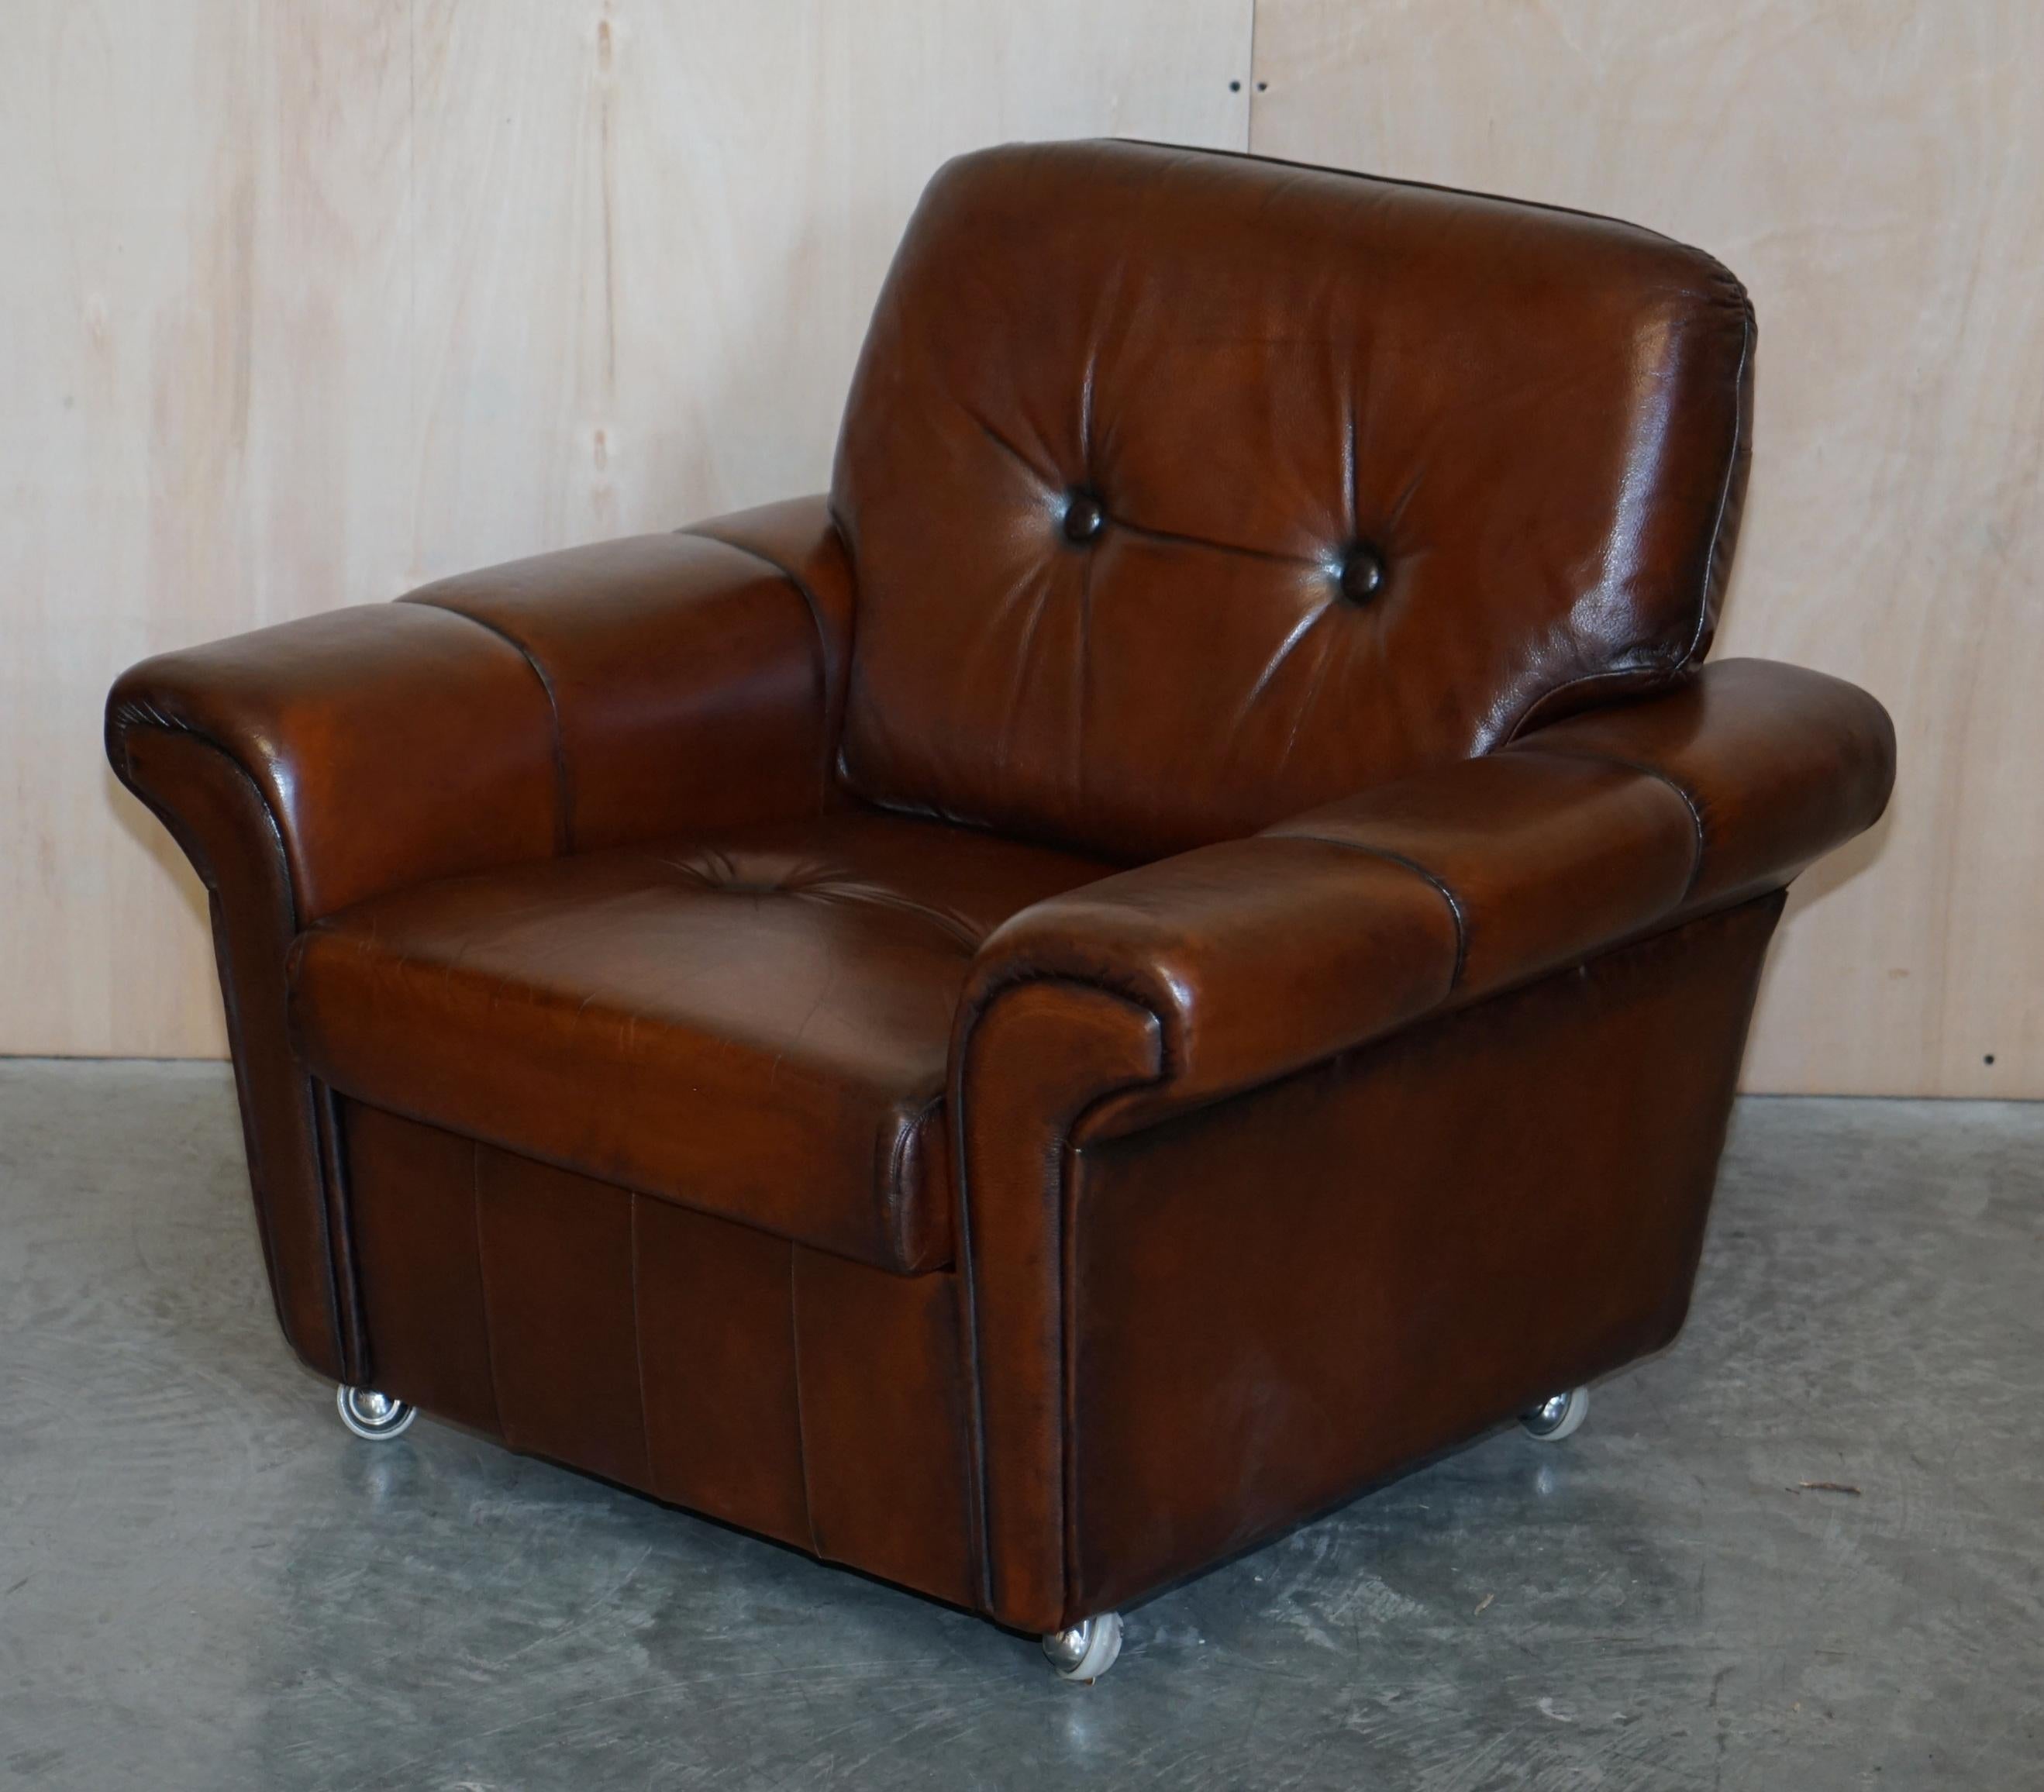 We are delighted to offer for sale this stunning fully restored pair of Dutch Mid-Century Modern, hand dyed rich cigar brown leather armchairs.

An exceptionally good looking well-made and comfortable pair of armchairs, the leather is silky soft